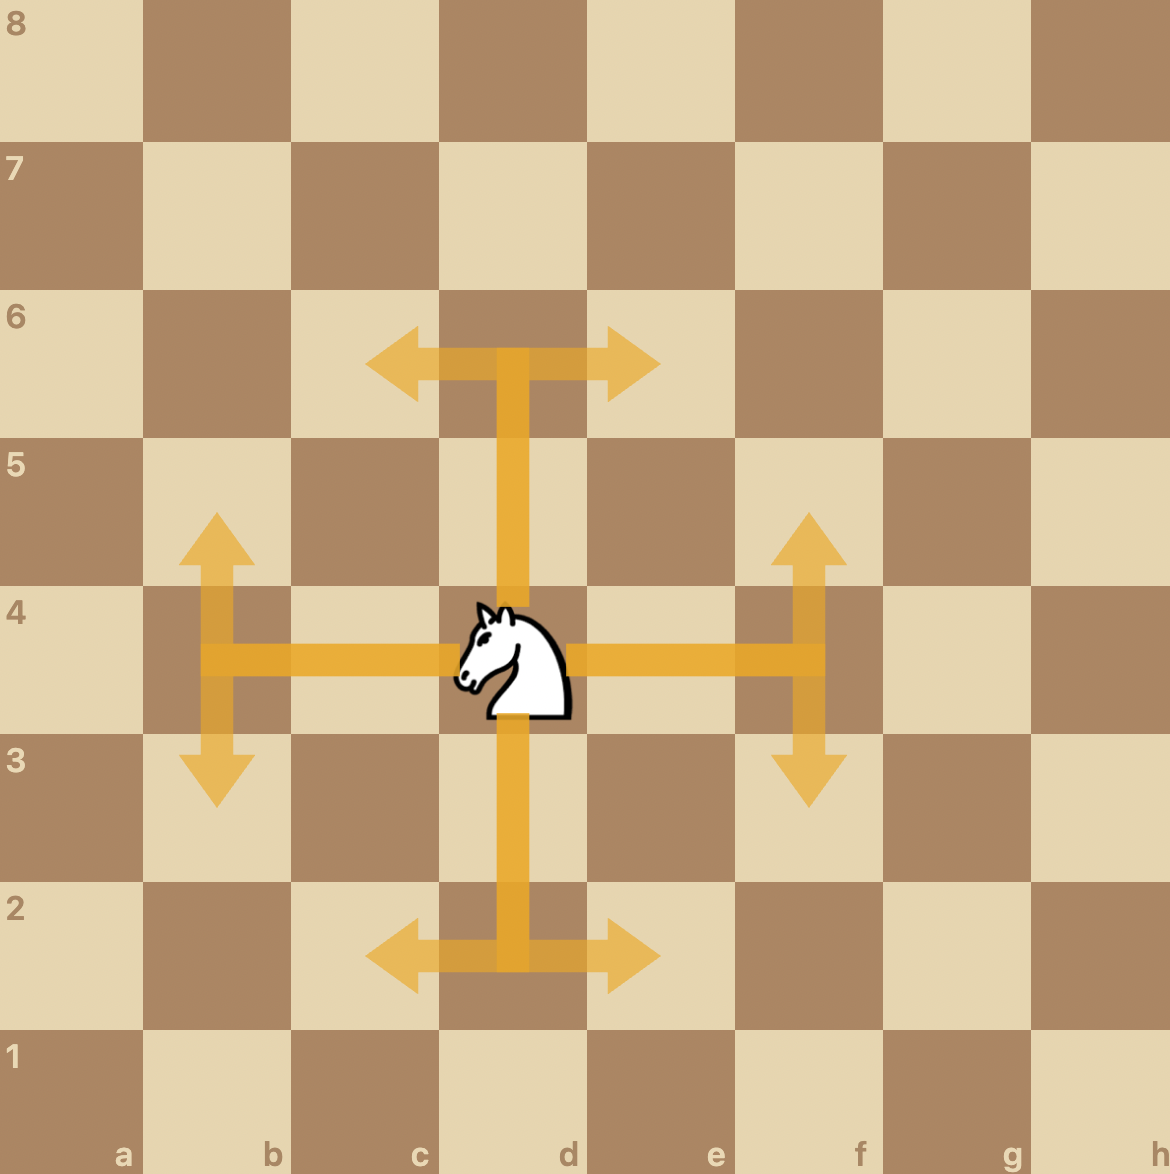 How the knight moves in chess